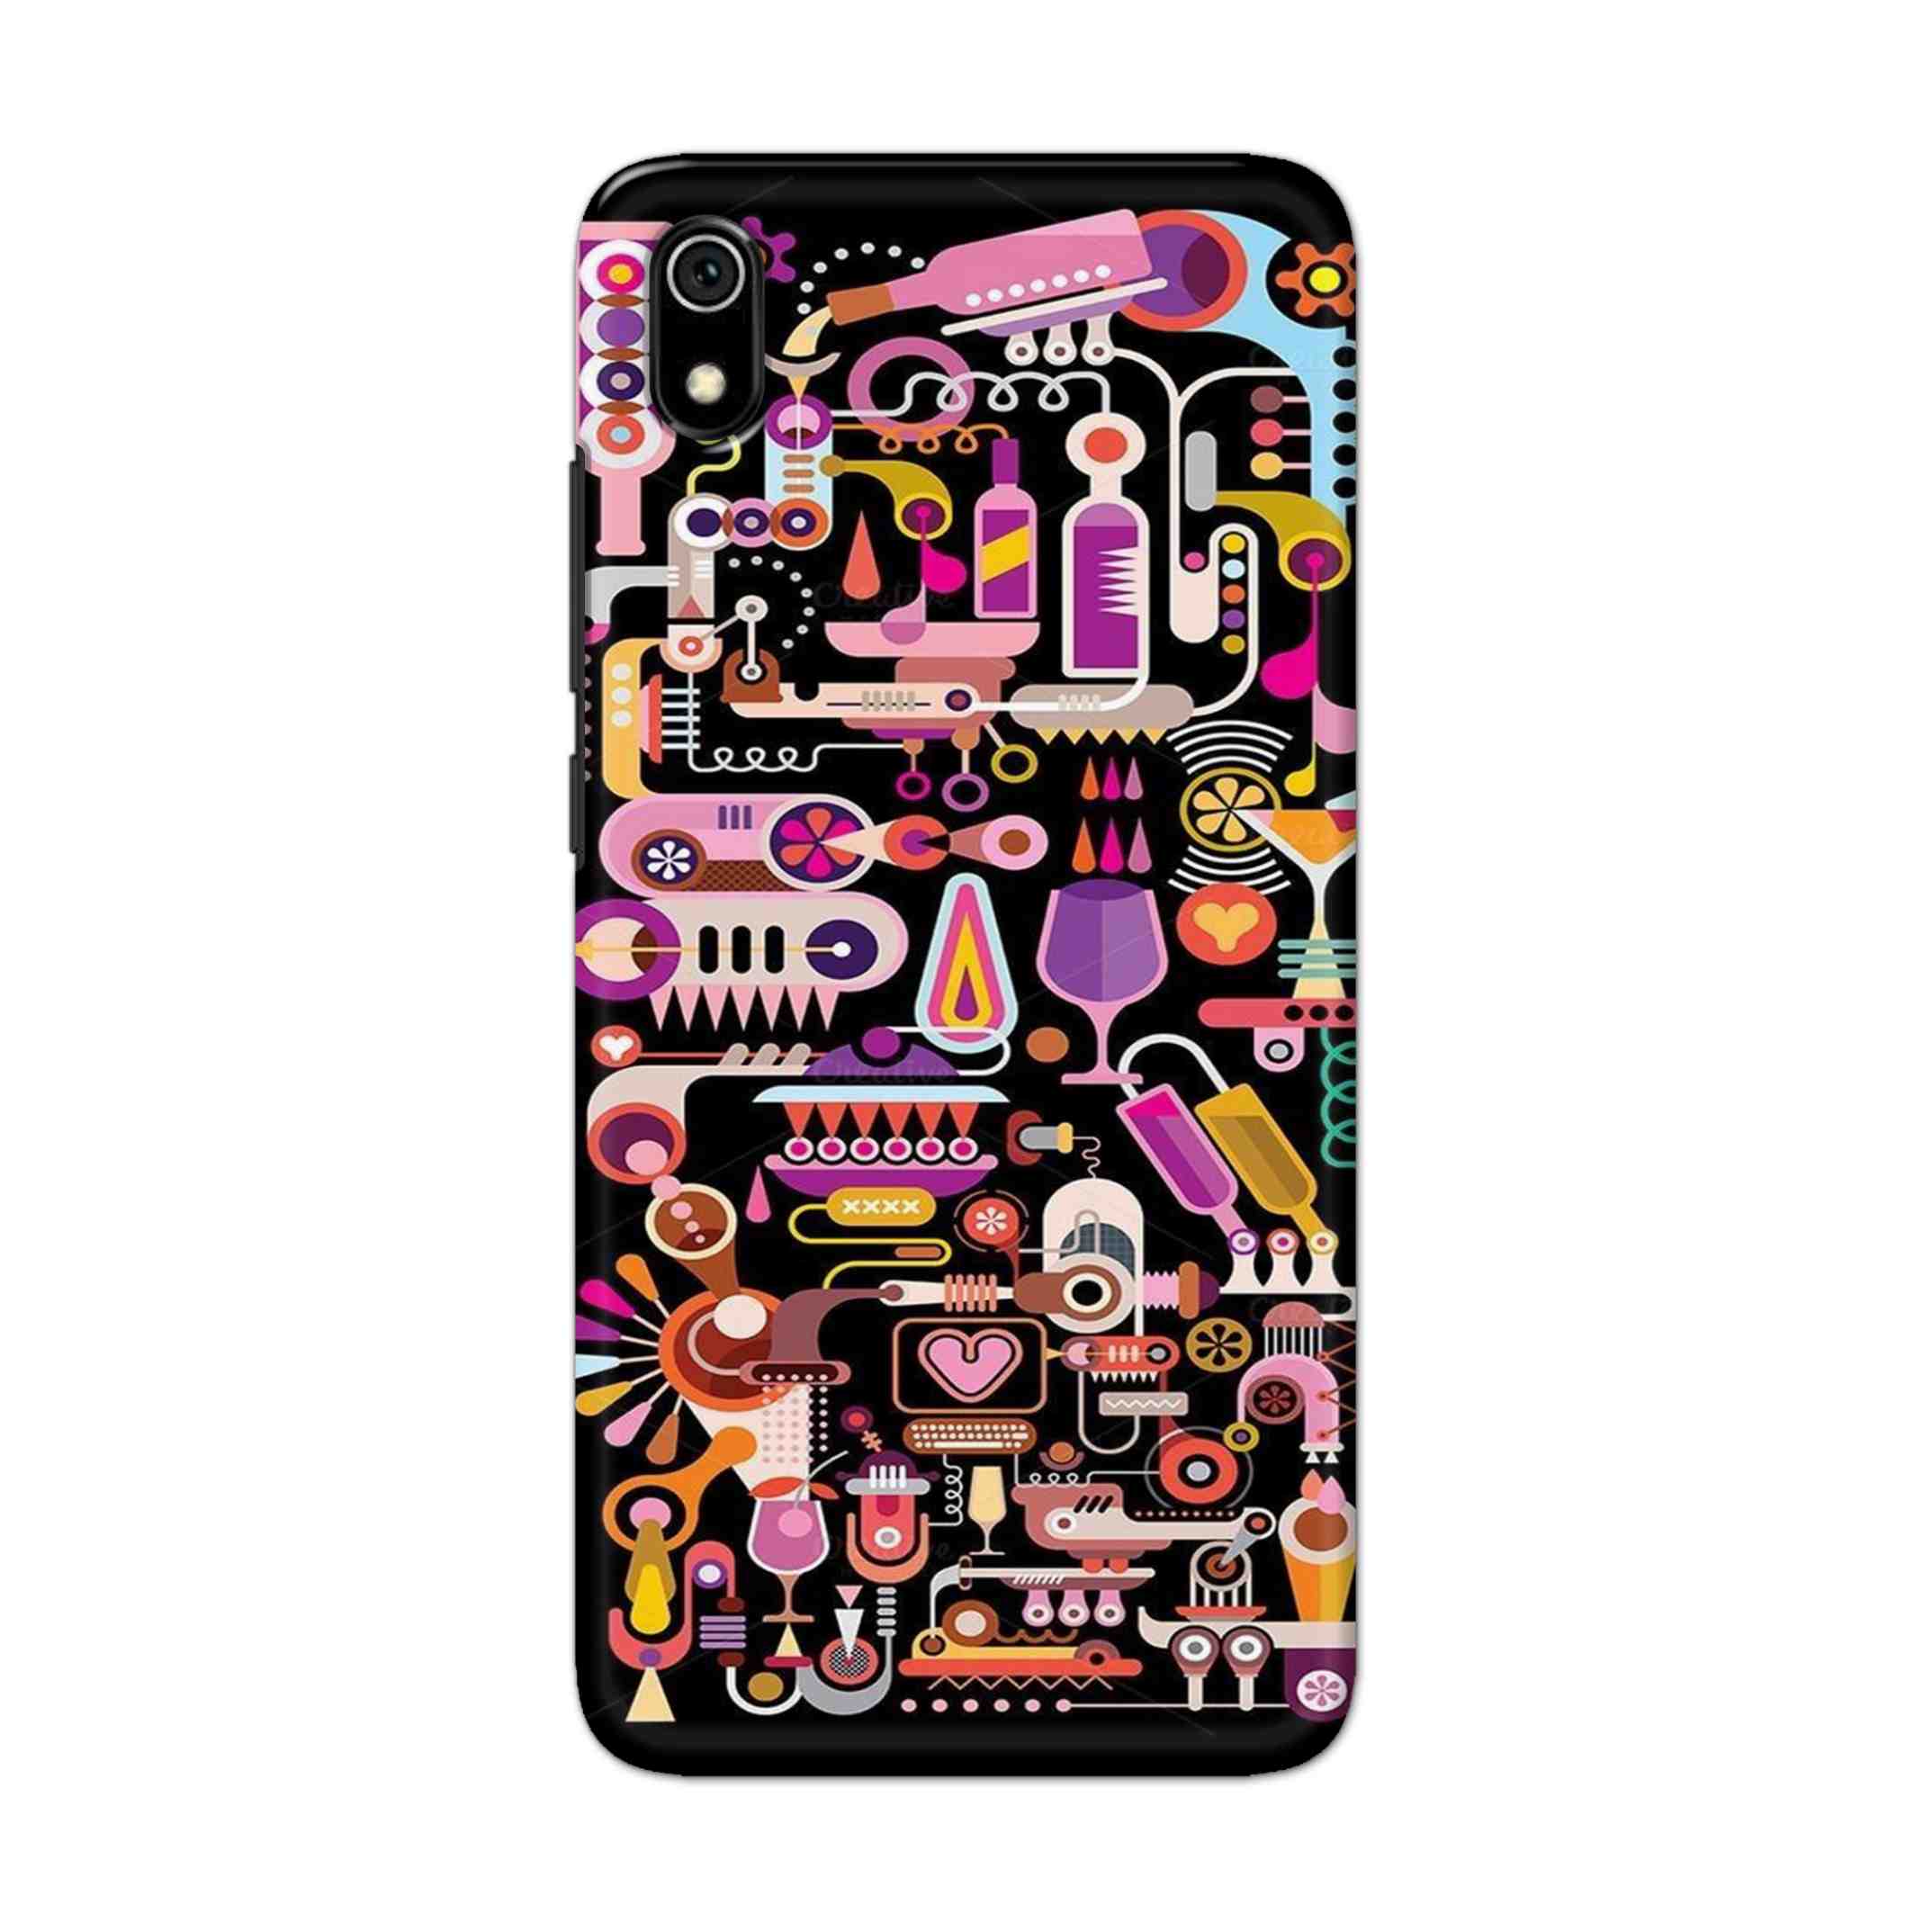 Buy Lab Art Hard Back Mobile Phone Case Cover For Xiaomi Redmi 7A Online